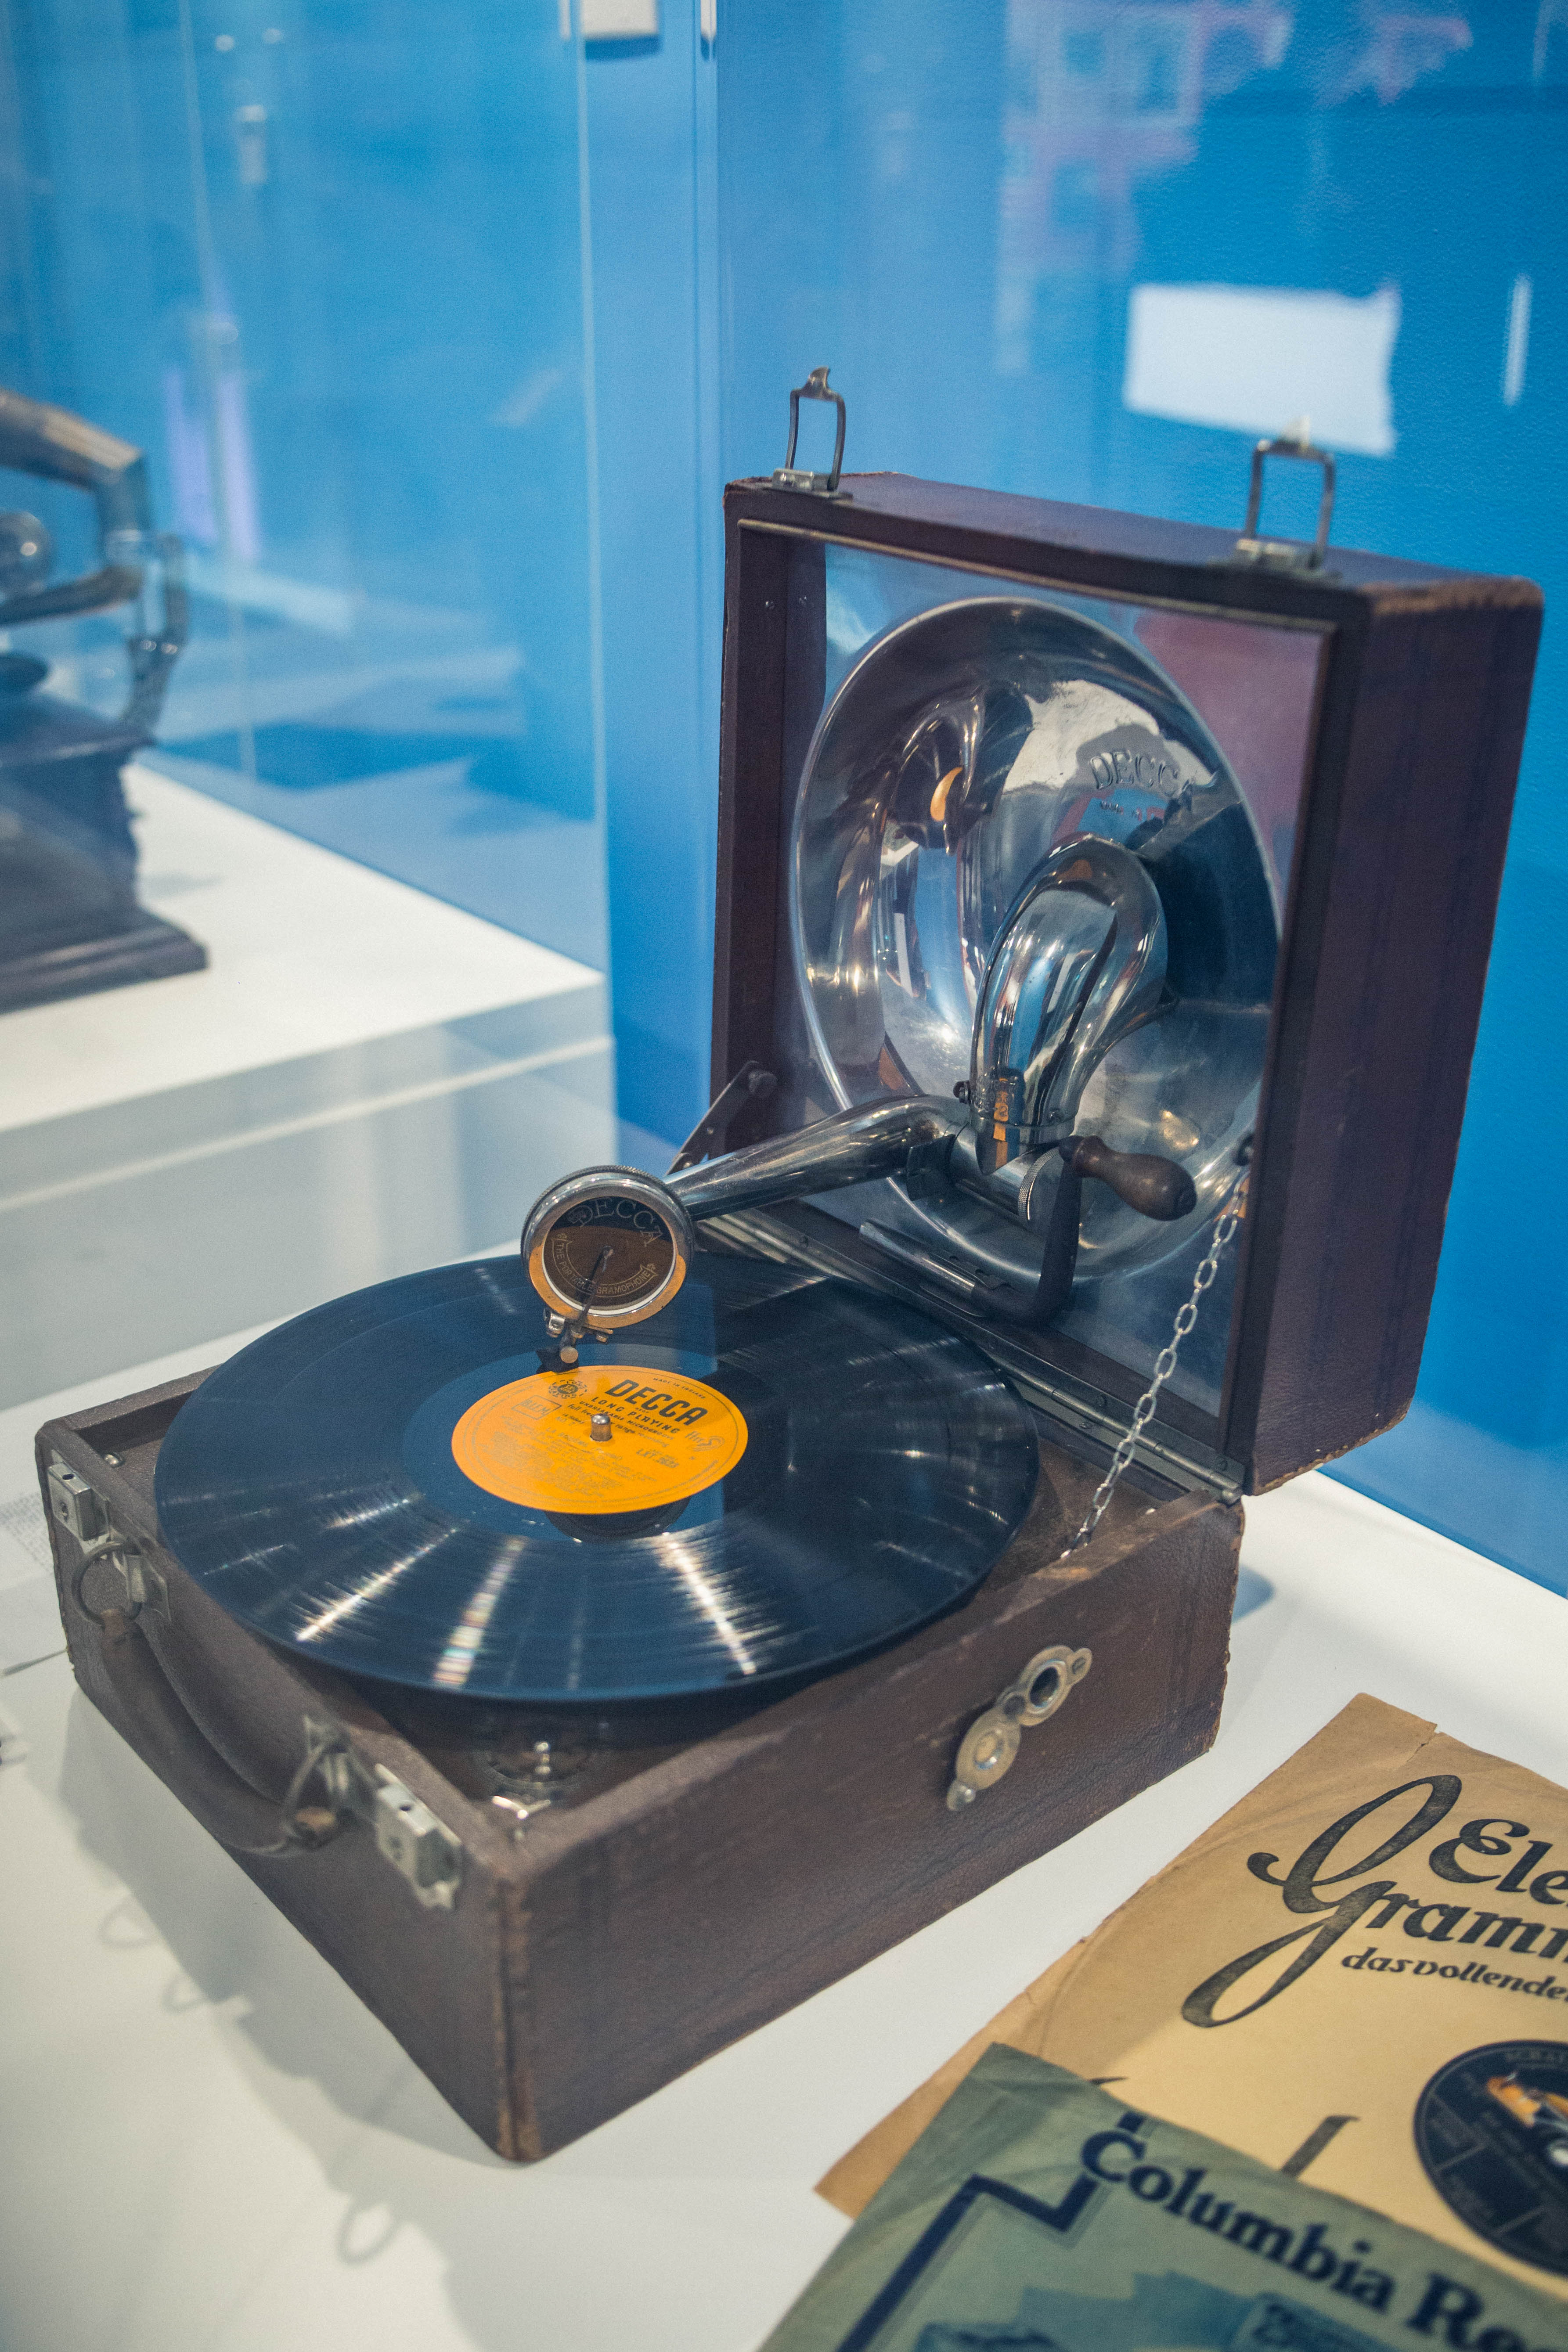 Decca gramophone patented by the Samuels family, London, England c 1921